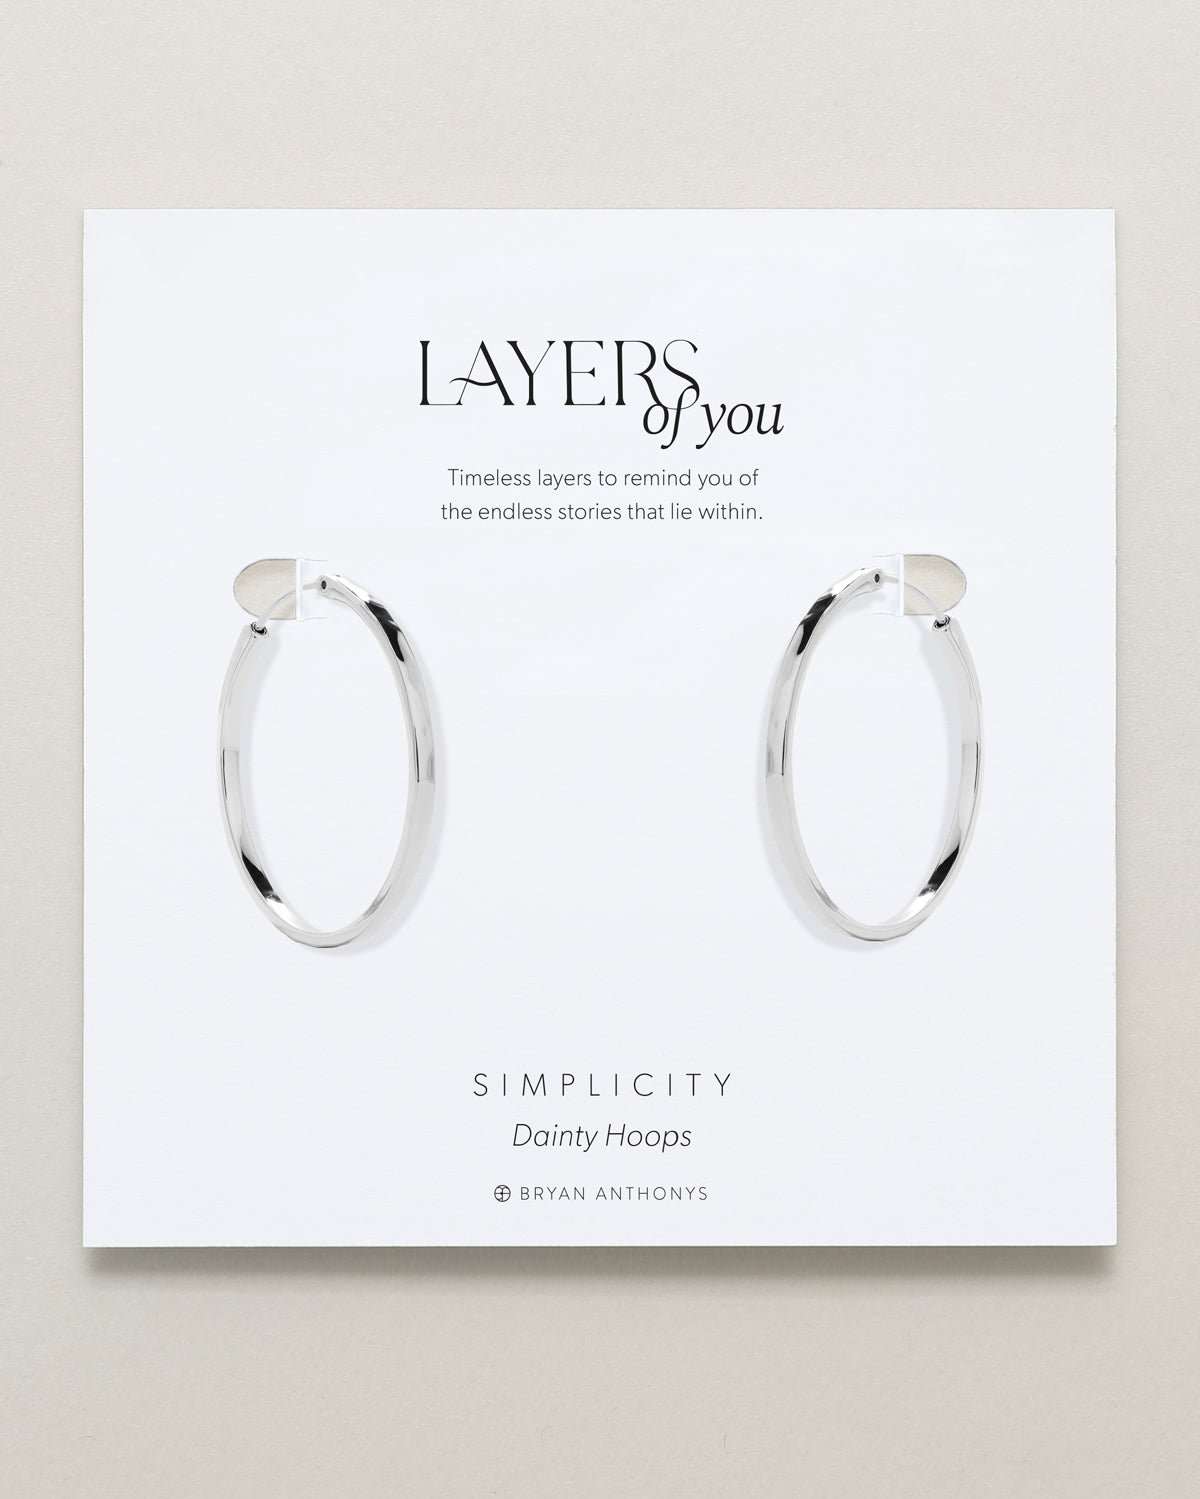 Bryan Anthonys Layers of You Simplicity Silver Hoop Earrings On Card